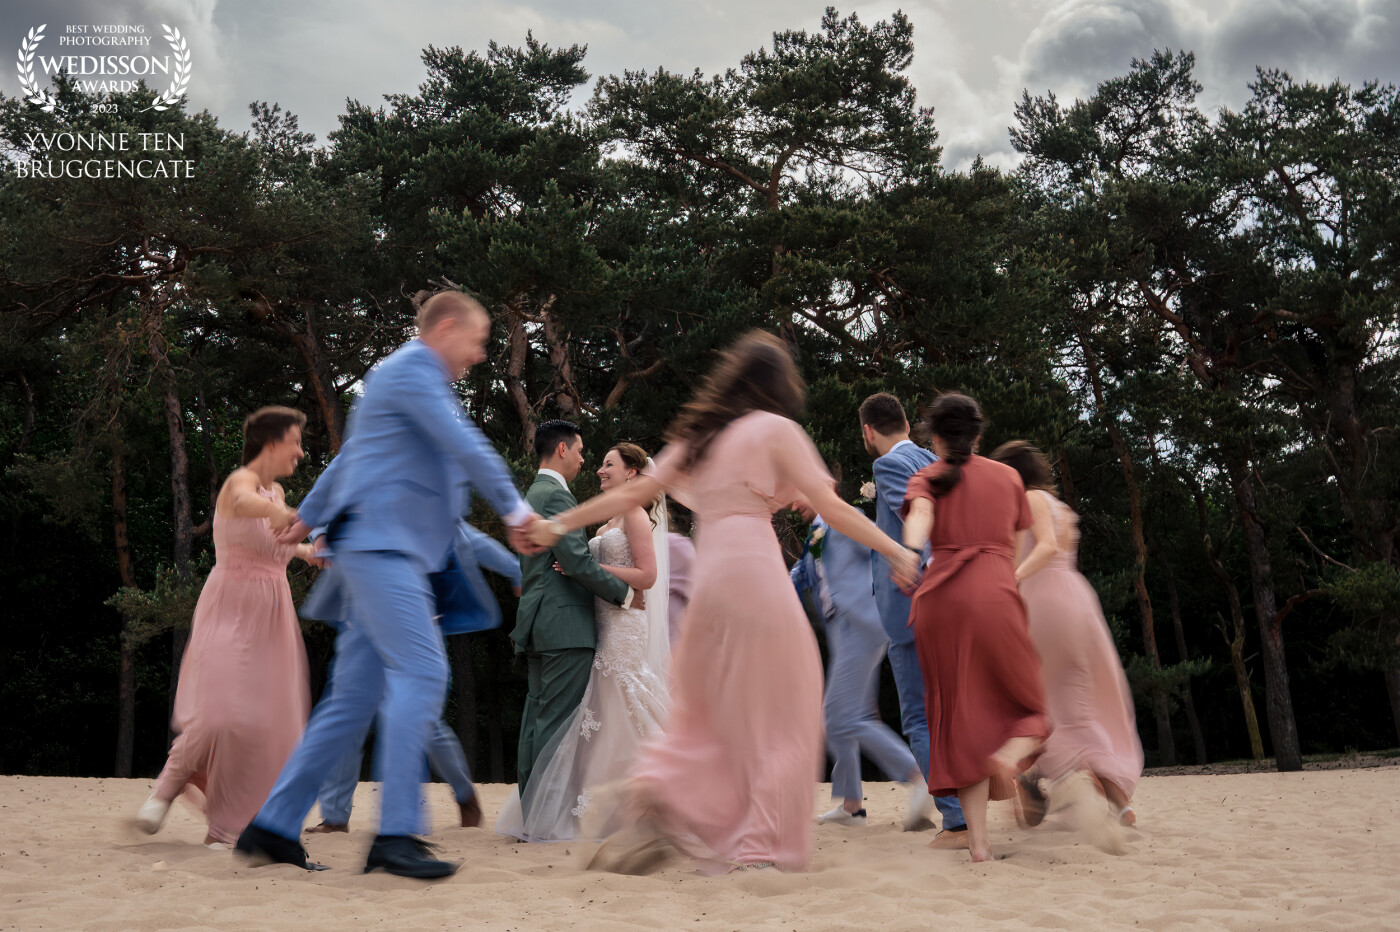 This couple went to the dunes with all their closest friends to have their wedding photo's taken. It was such a great group of young people. We had so much fun, so I'd been able to go wild and creative as much as I wanted.